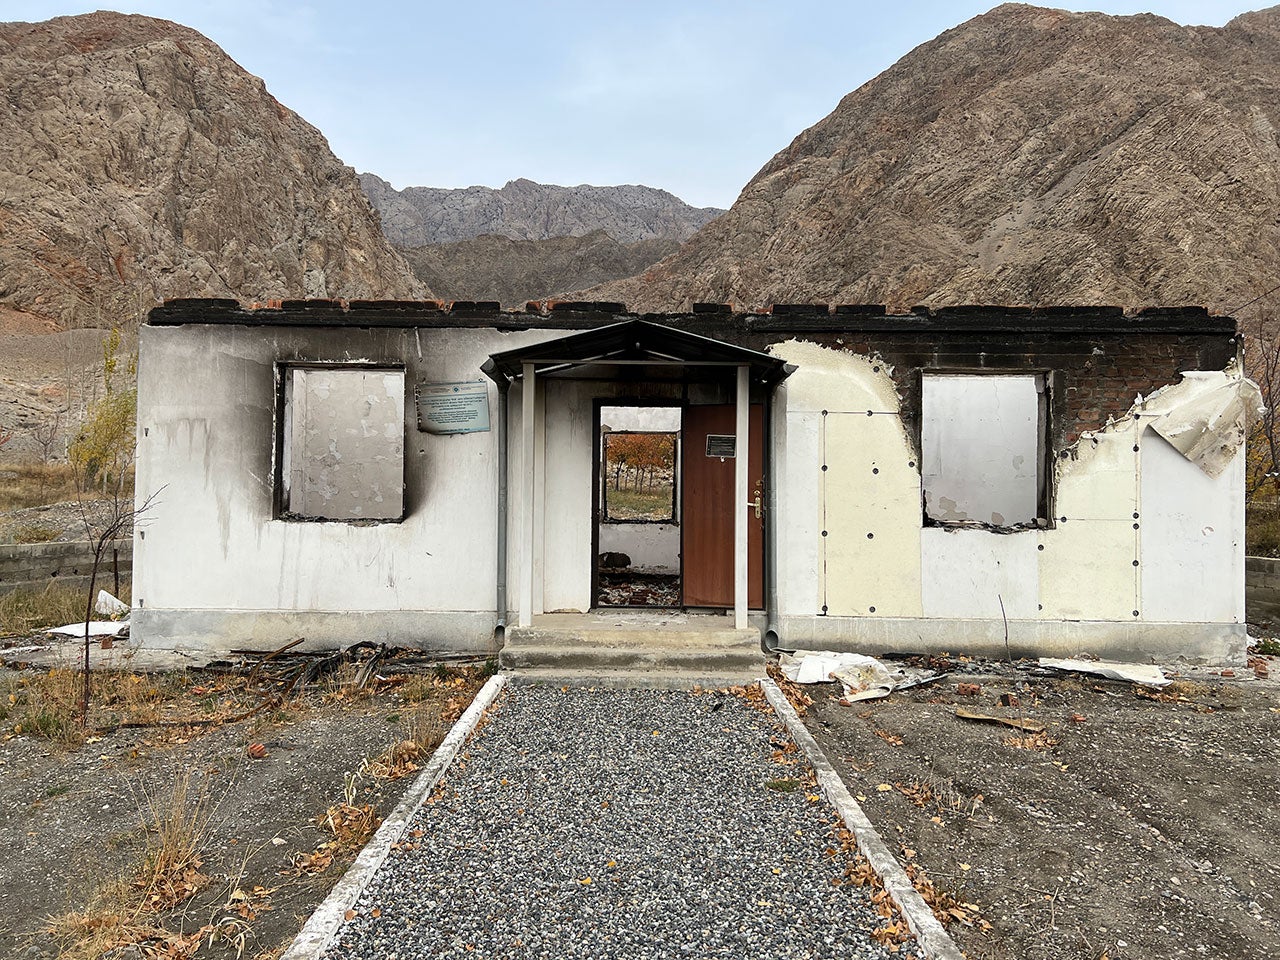 This burnt-out primary medical facility in the Kyrgyz village of Kapchygai shows no signs of damage from fighting nor evidence that fire spread naturally to the building.